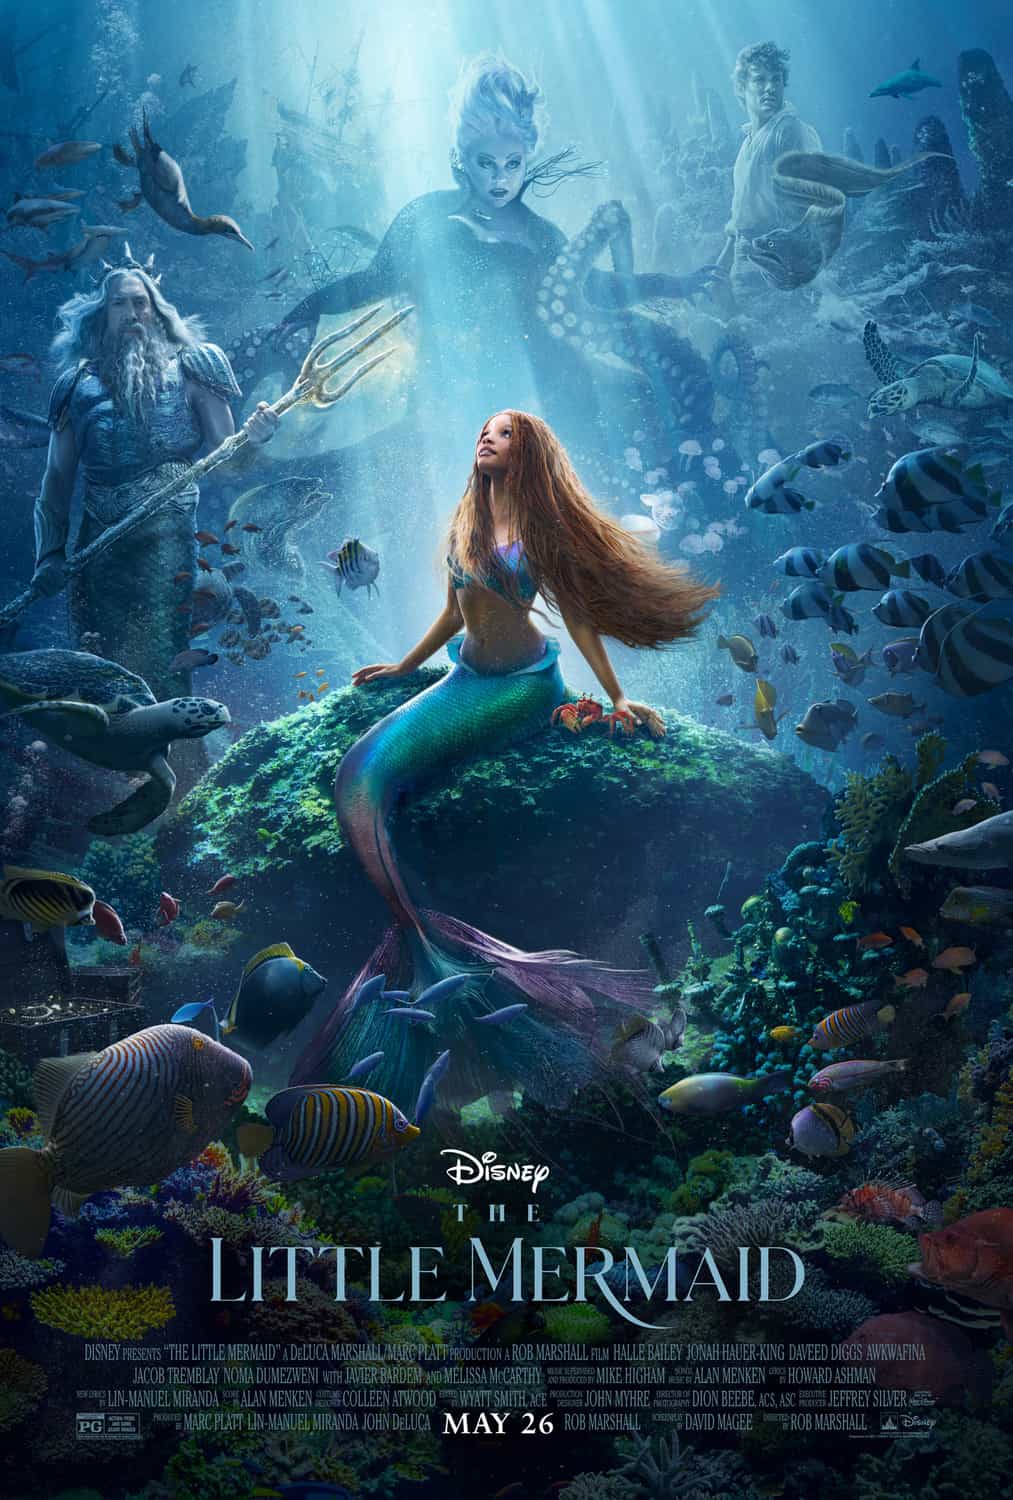 US new movie releases for weekend 26th May 2023 - The Little Mermaid heads up the US new movies #thelittlemermaid #kandahar #themachine #aboutmyfather #exhibitiononscreentokyostories2023